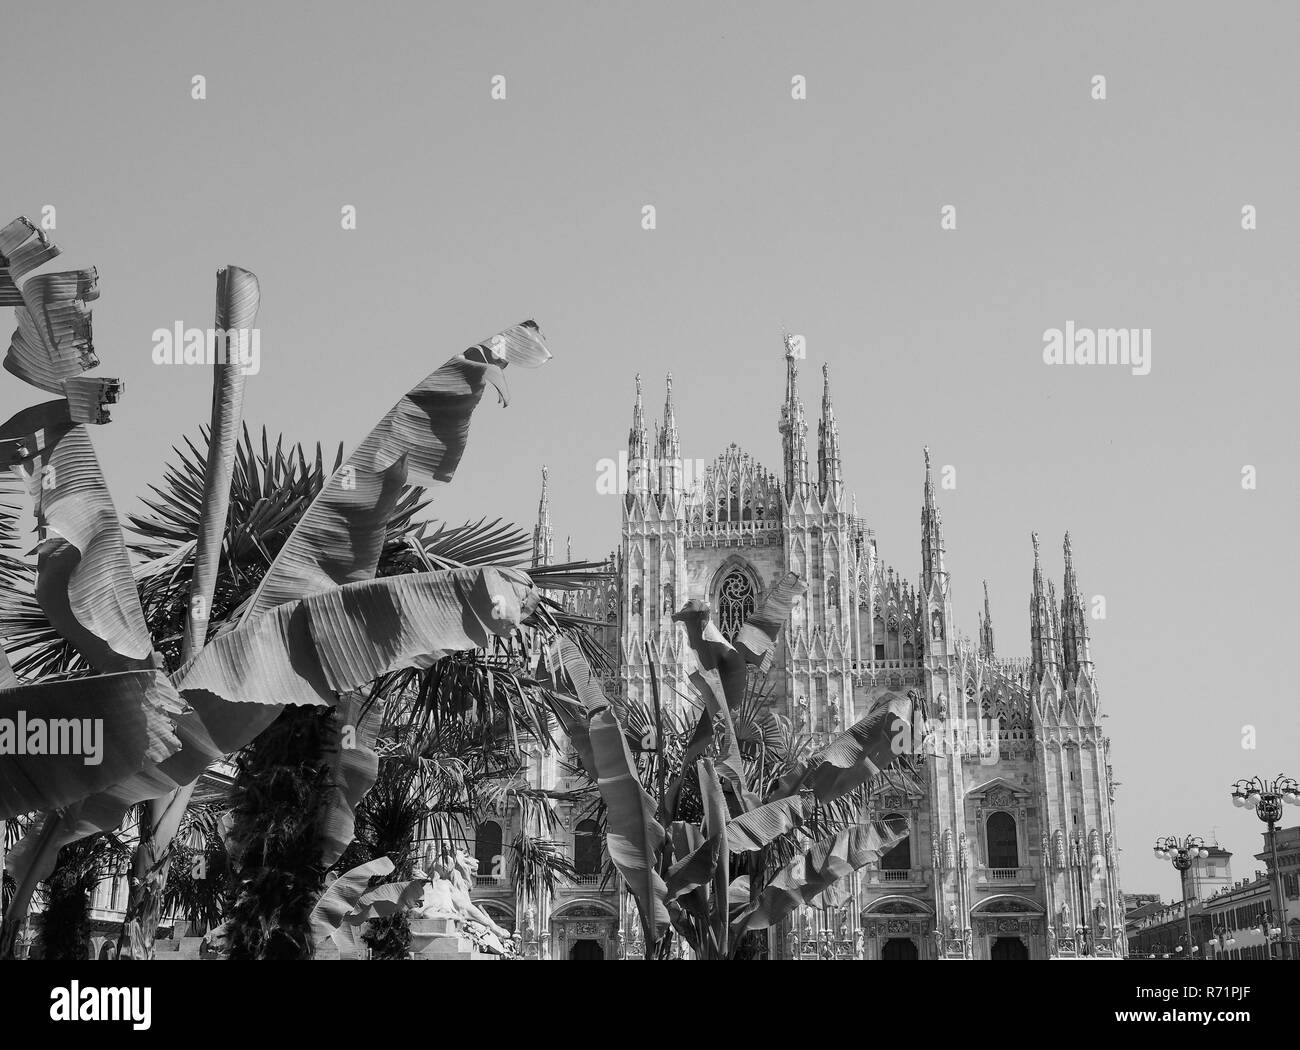 Duomo (meaning Cathedral) in Milan, black and white Stock Photo - Alamy